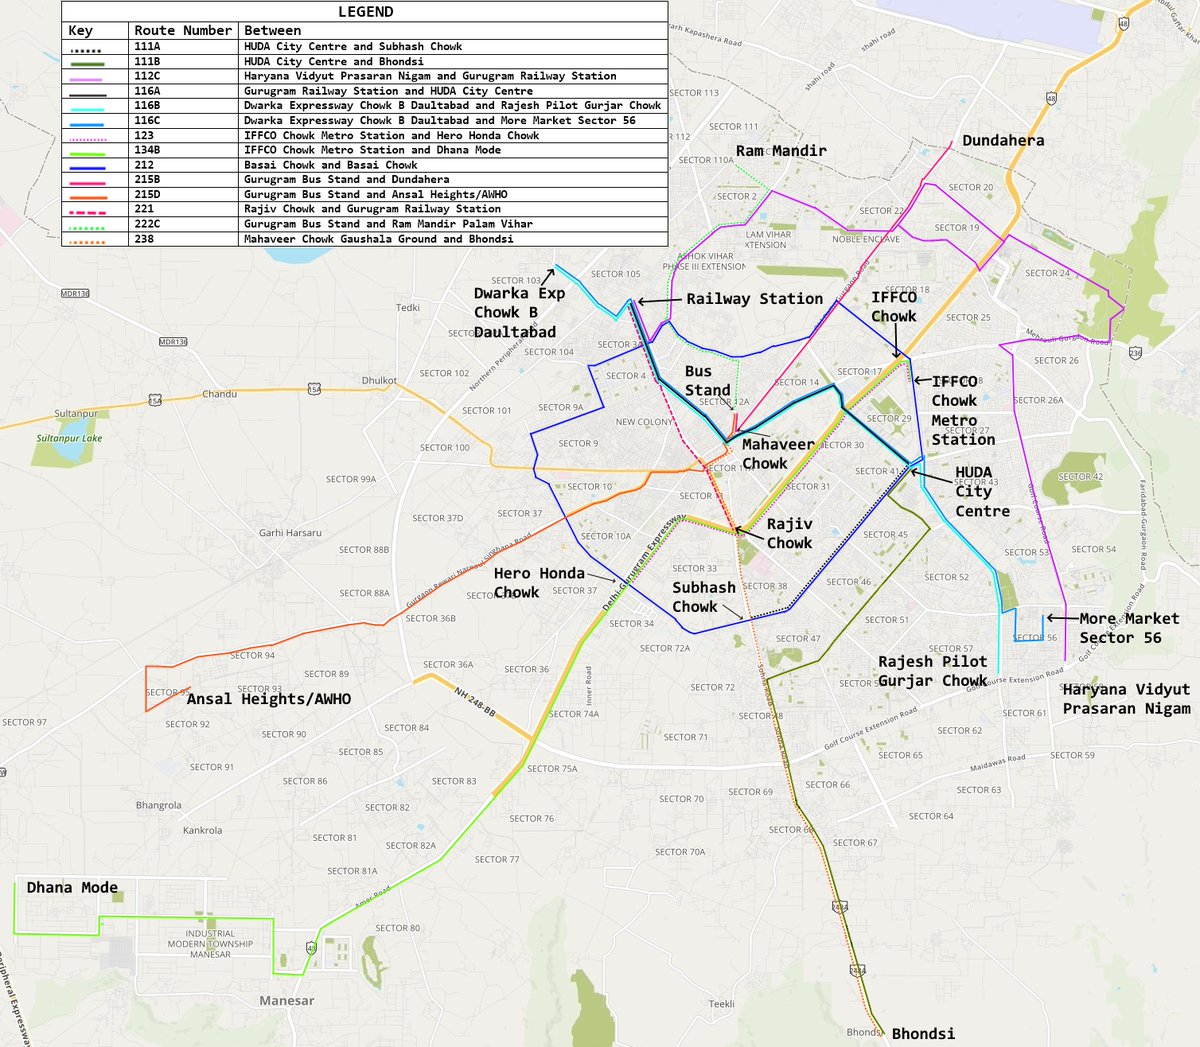 Lucknow City Bus Route Chart